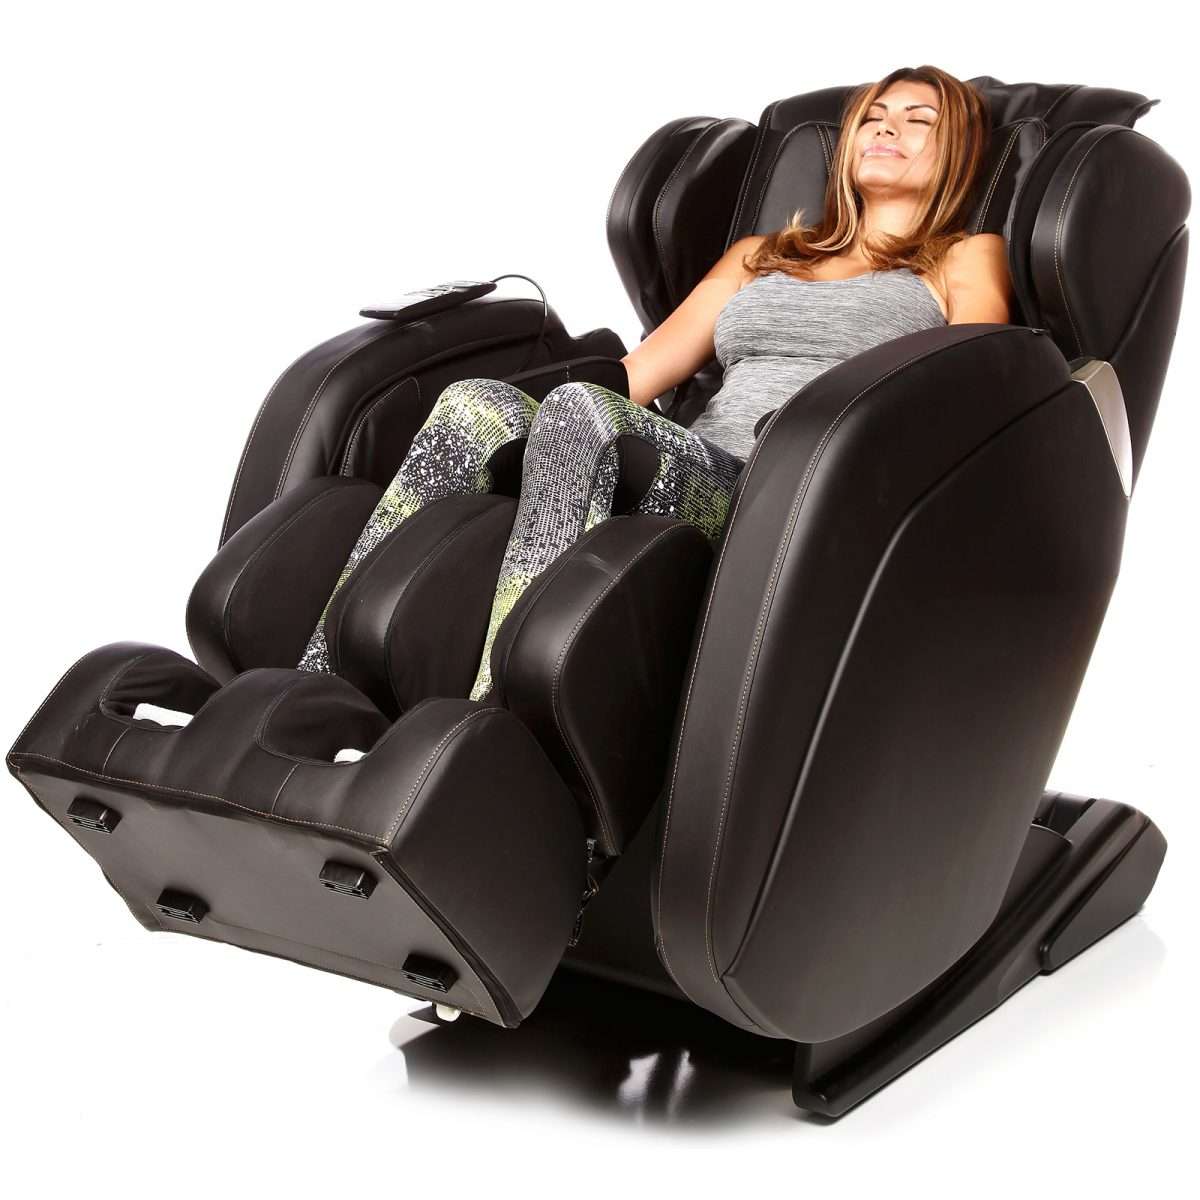 Dynamic Chair Ideas: 7 Tips On How To Choose The Best Massage Chair In ...